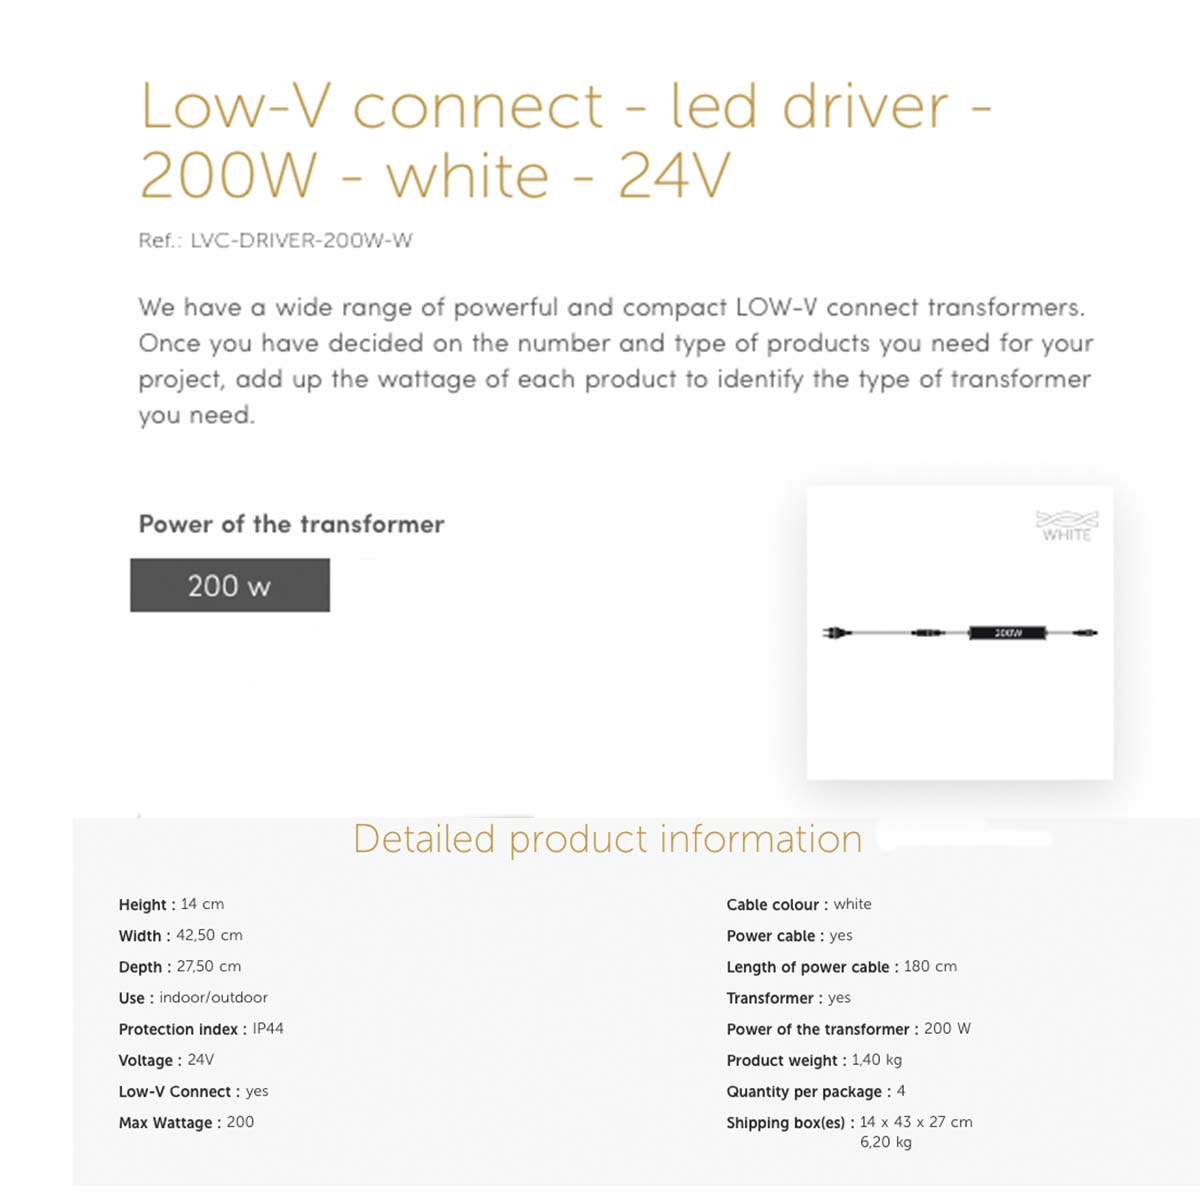 200W low-v connect driver 24v white cable specs